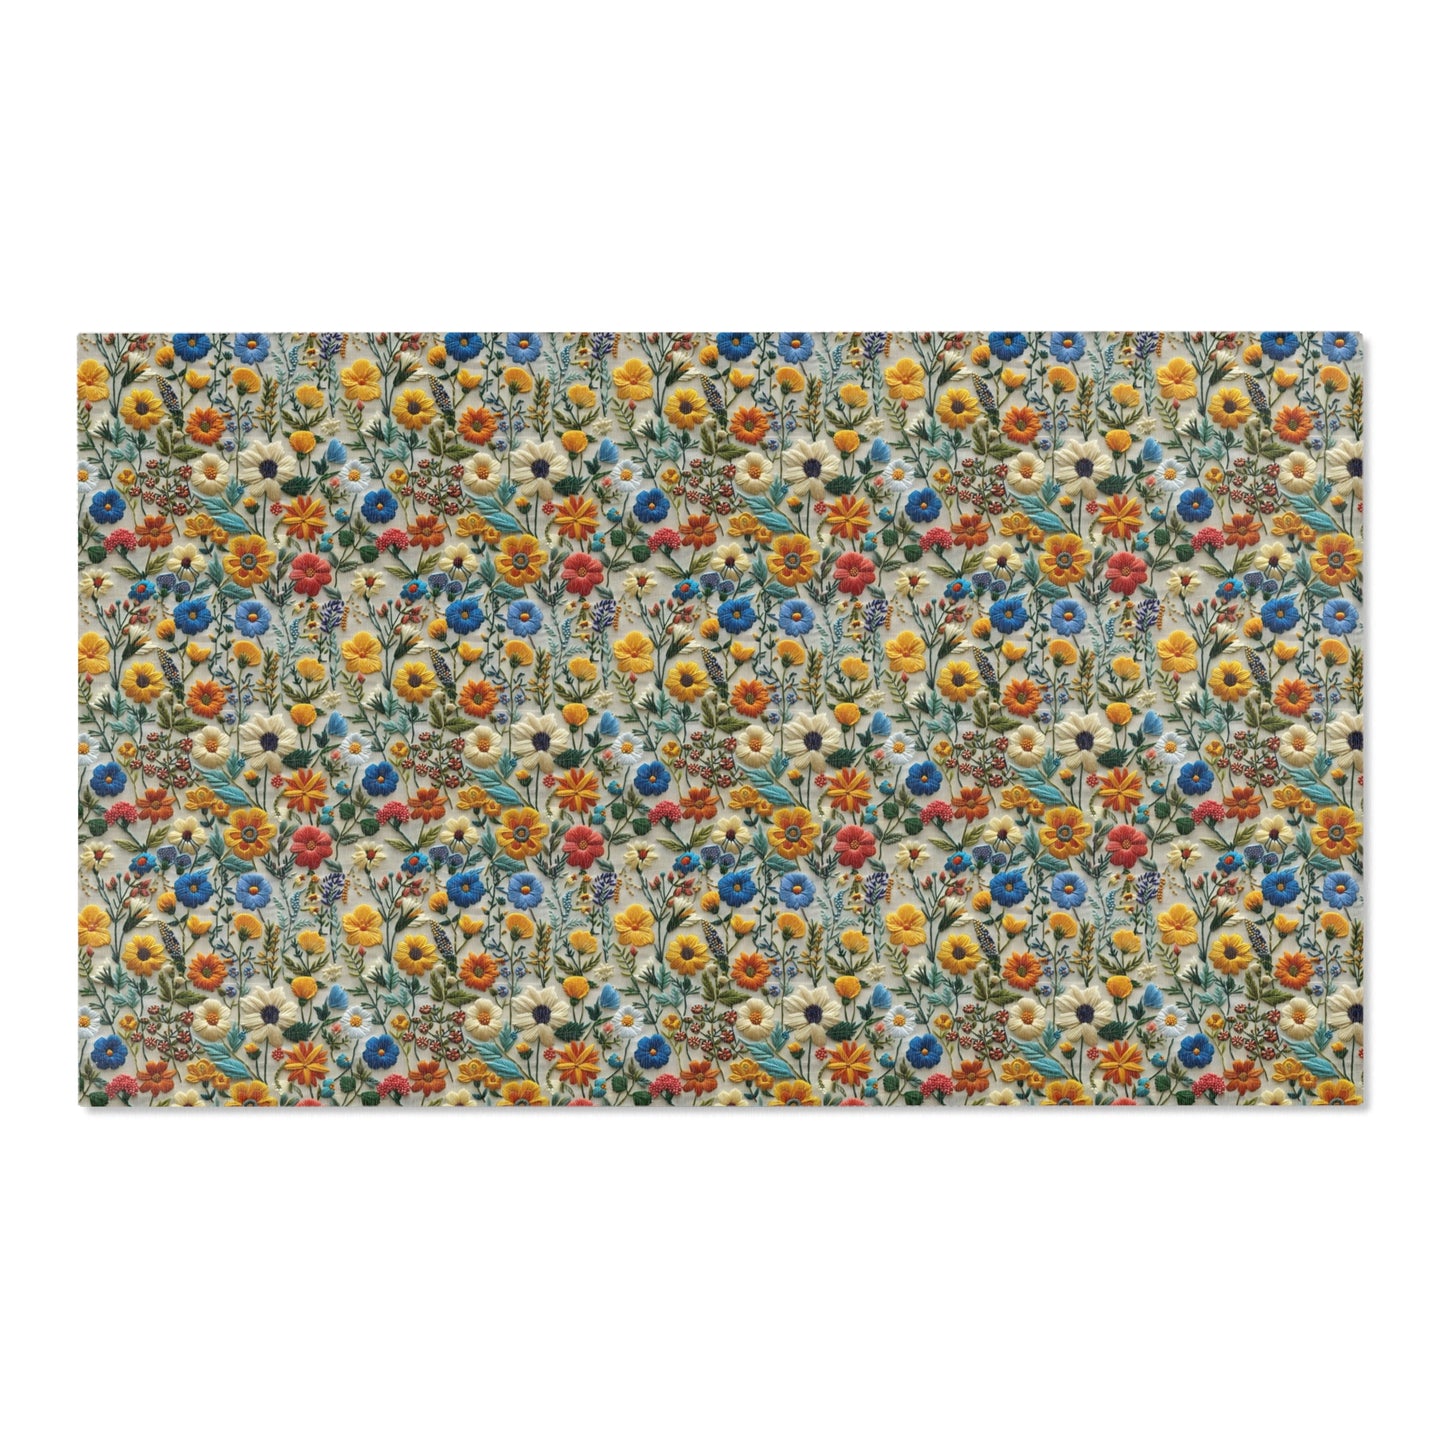 Floral Area Rug Carpet, Faux Embroidery Washable American Living Room Floor Indoor Outdoor 2x3 4x6 3x5 Kitchen Nursery Accent Bedroom Mat